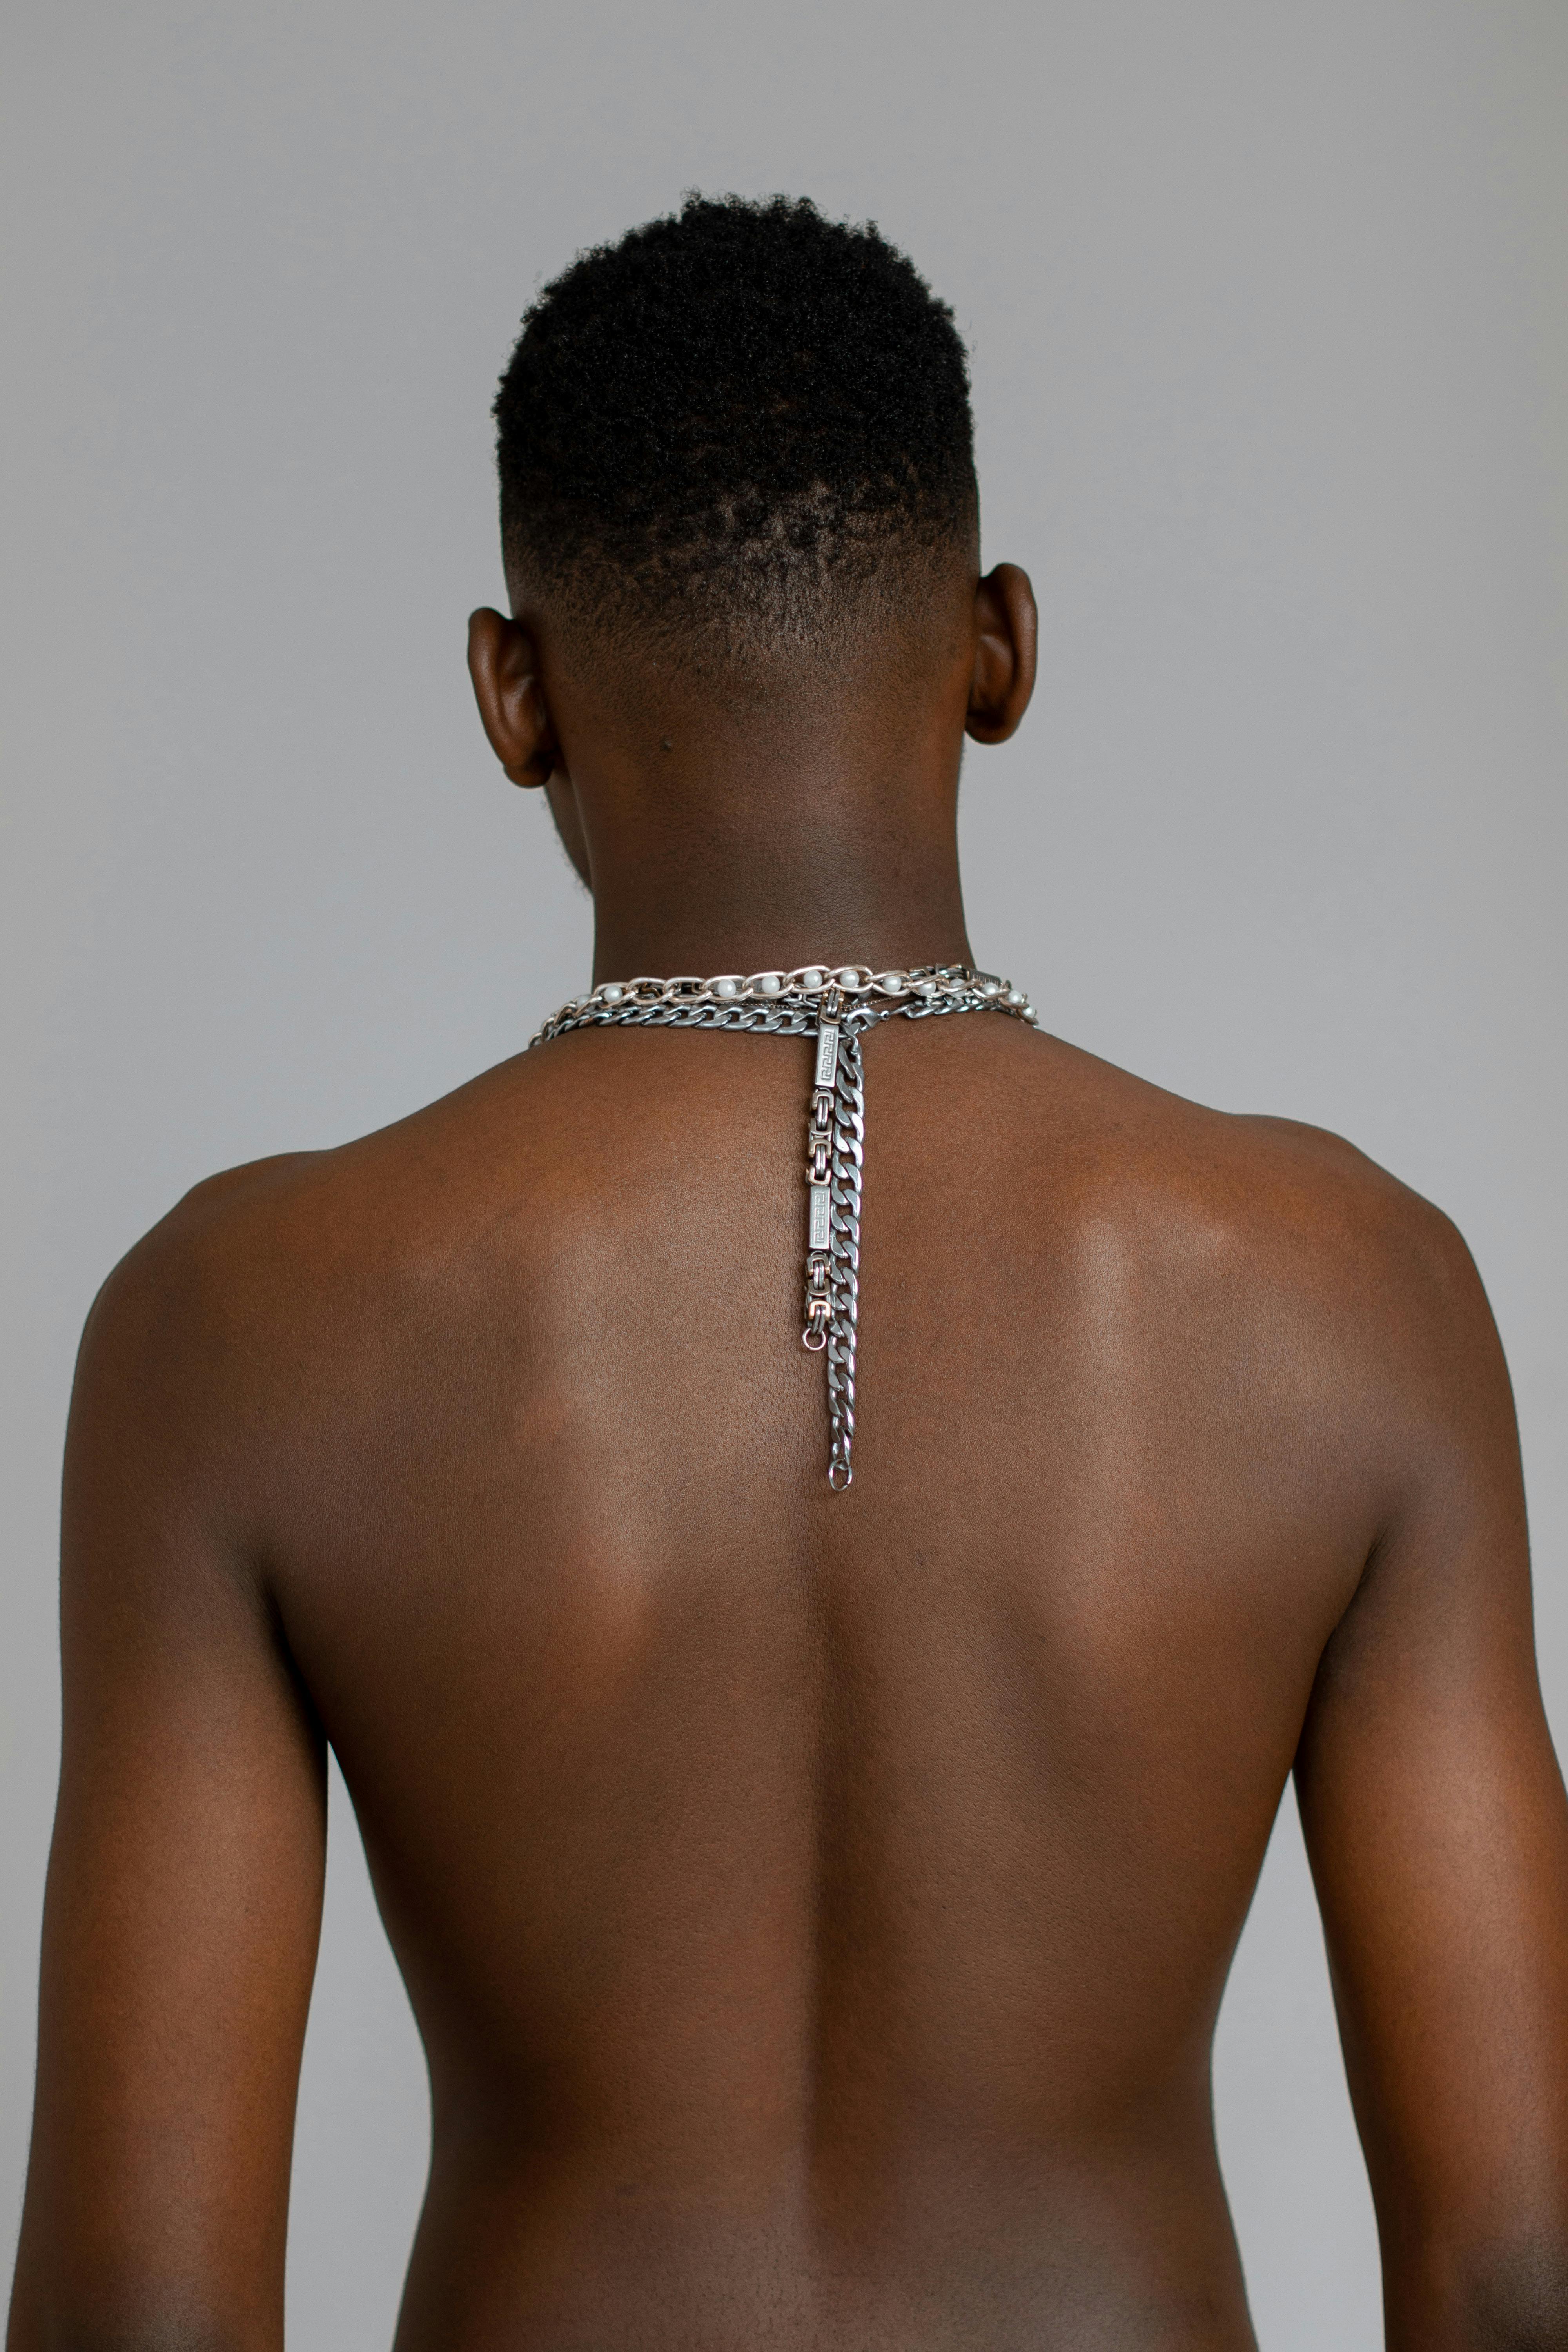 Topless Man With Silver Chain Necklace · Free Stock Photo